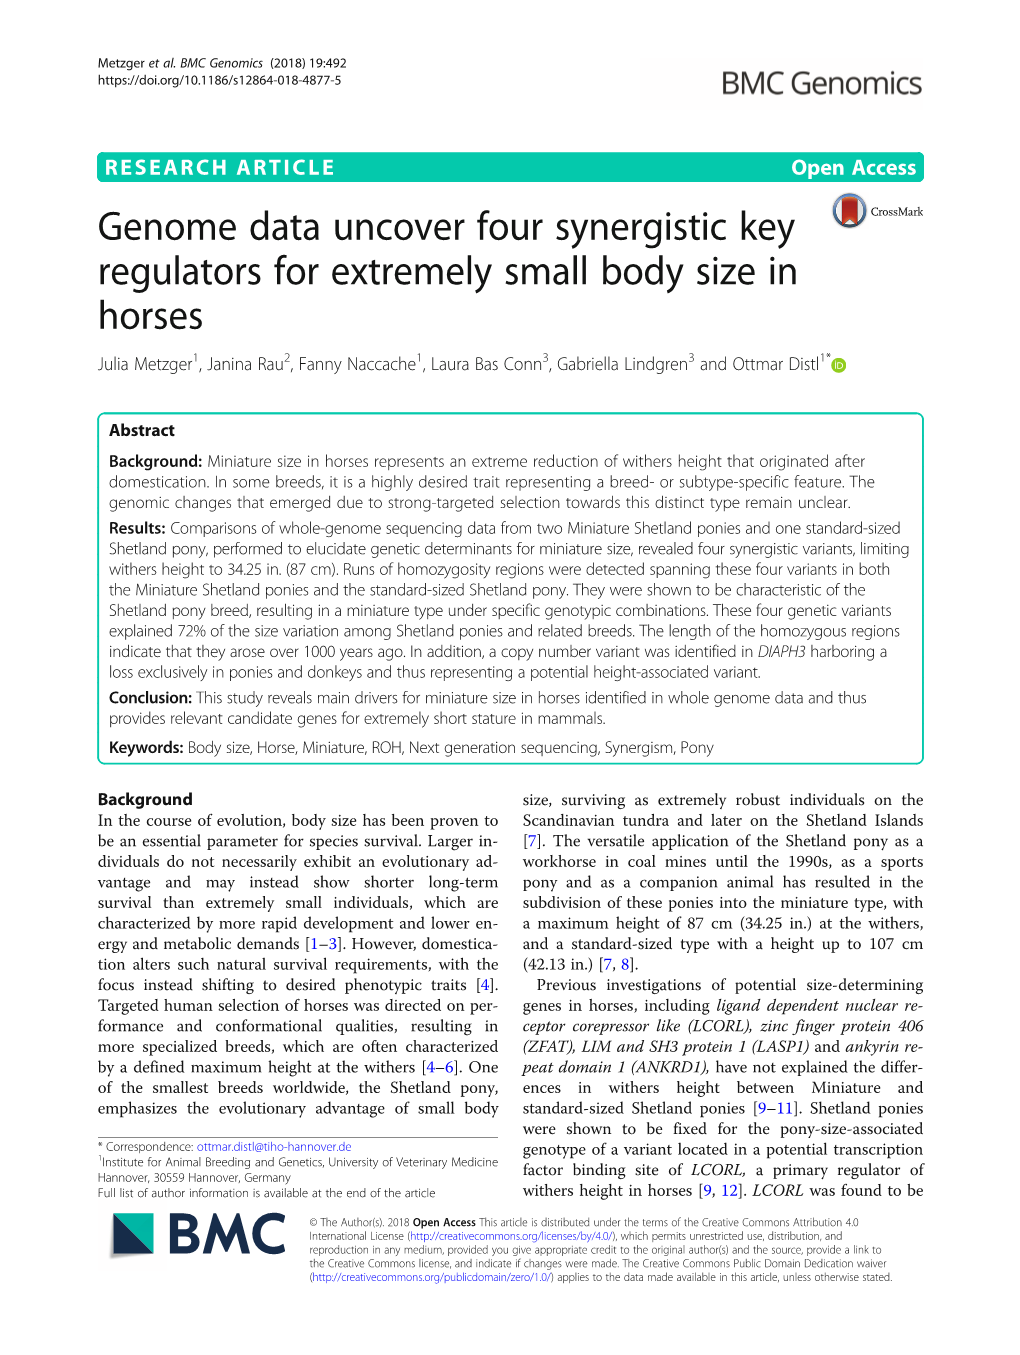 Genome Data Uncover Four Synergistic Key Regulators for Extremely Small Body Size in Horses